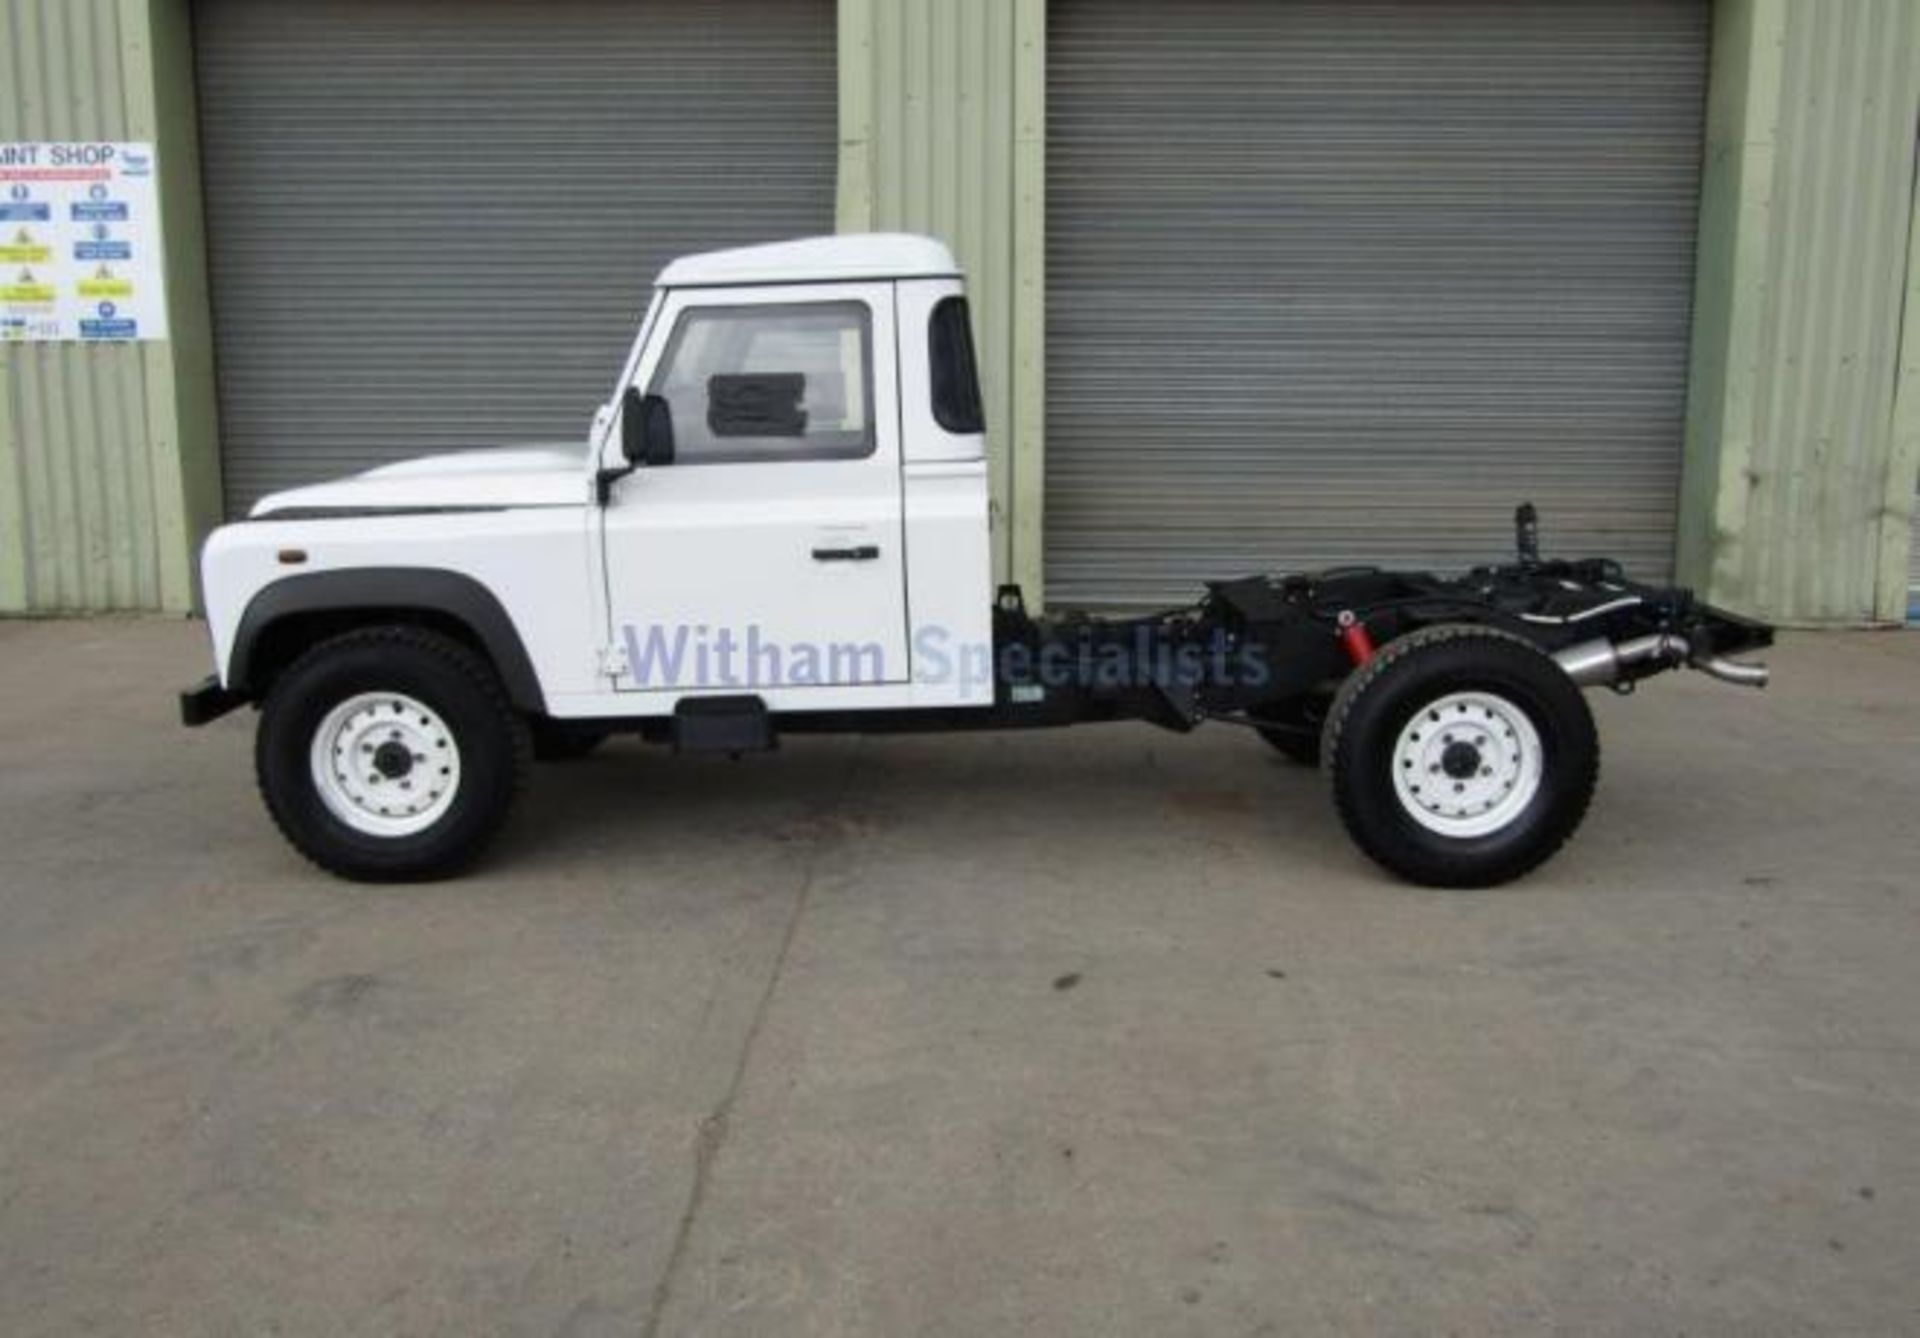 NEW UNUSED Export Specification Land Rover Defender Armoured 130 Chassis Cab - Bild 5 aus 19